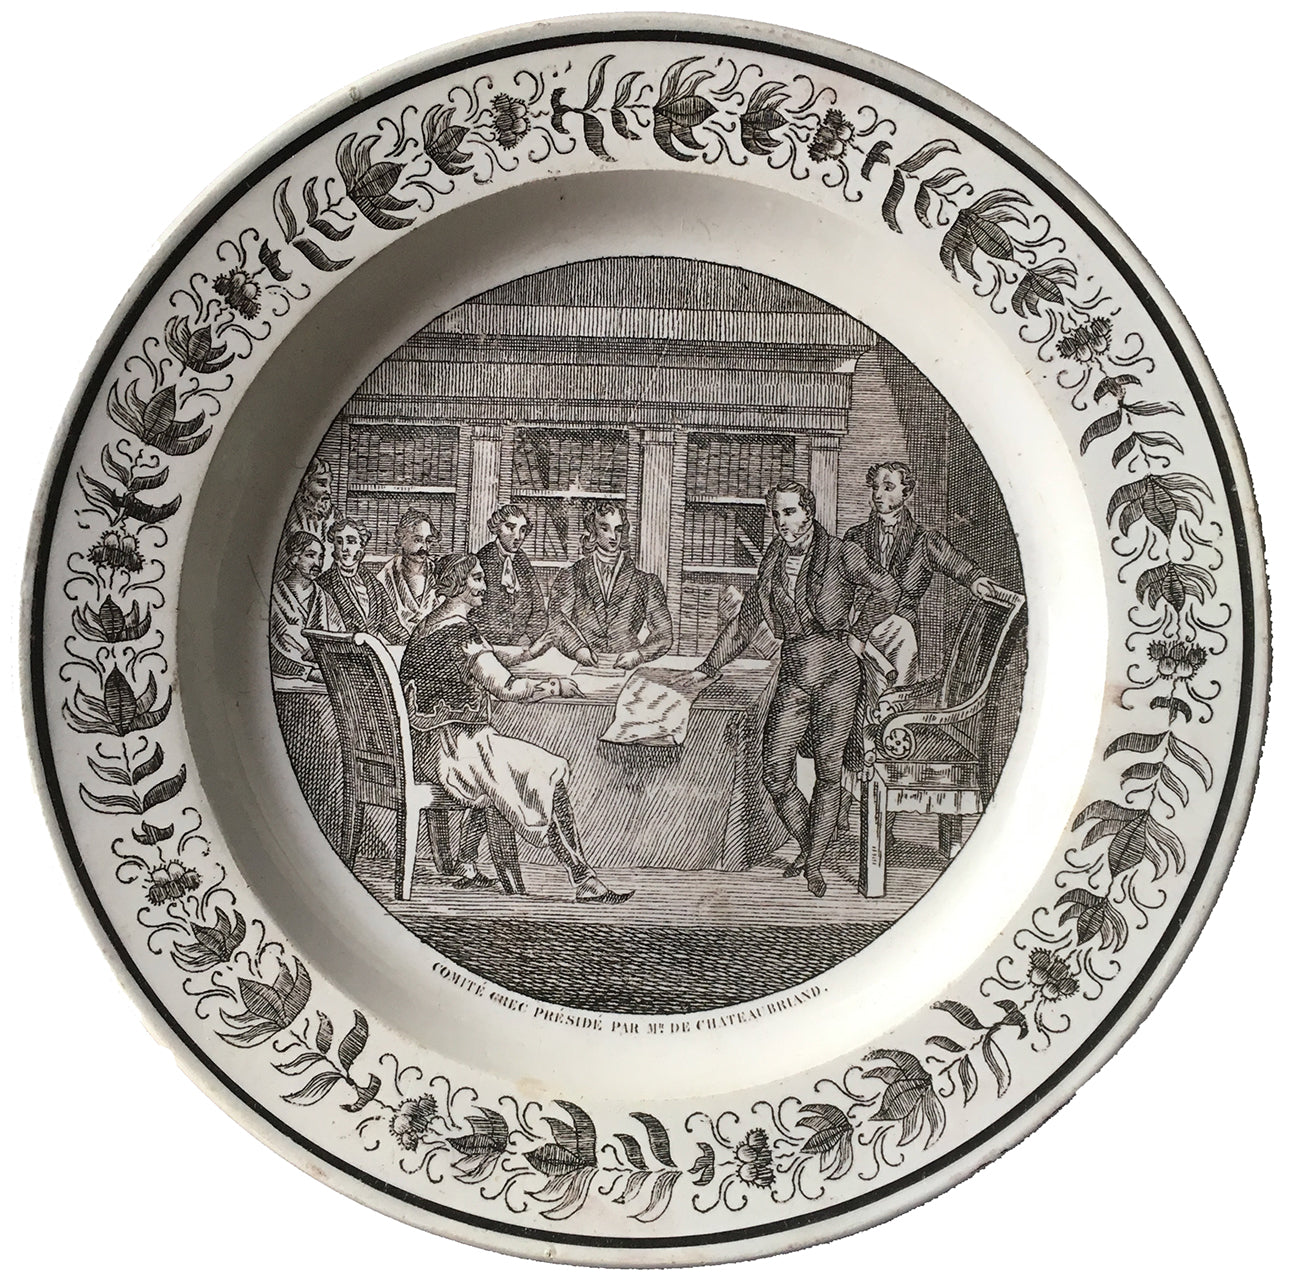 SOLD French Creil Creamware Plate, Transfer-Printed with Chateaubriand Meeting